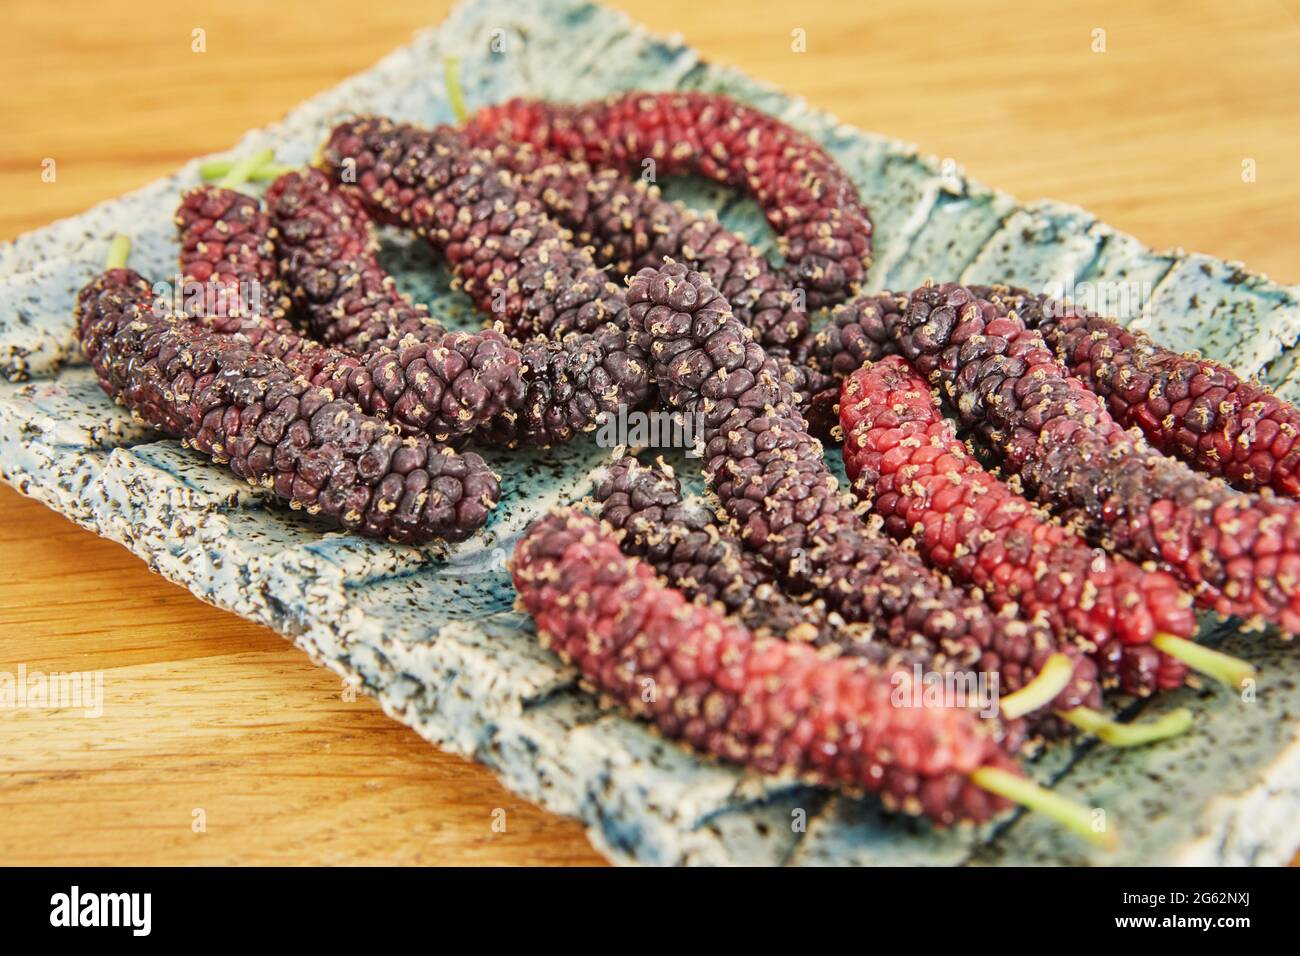 Afghan mulberry black and red lying on plate, close-up Stock Photo